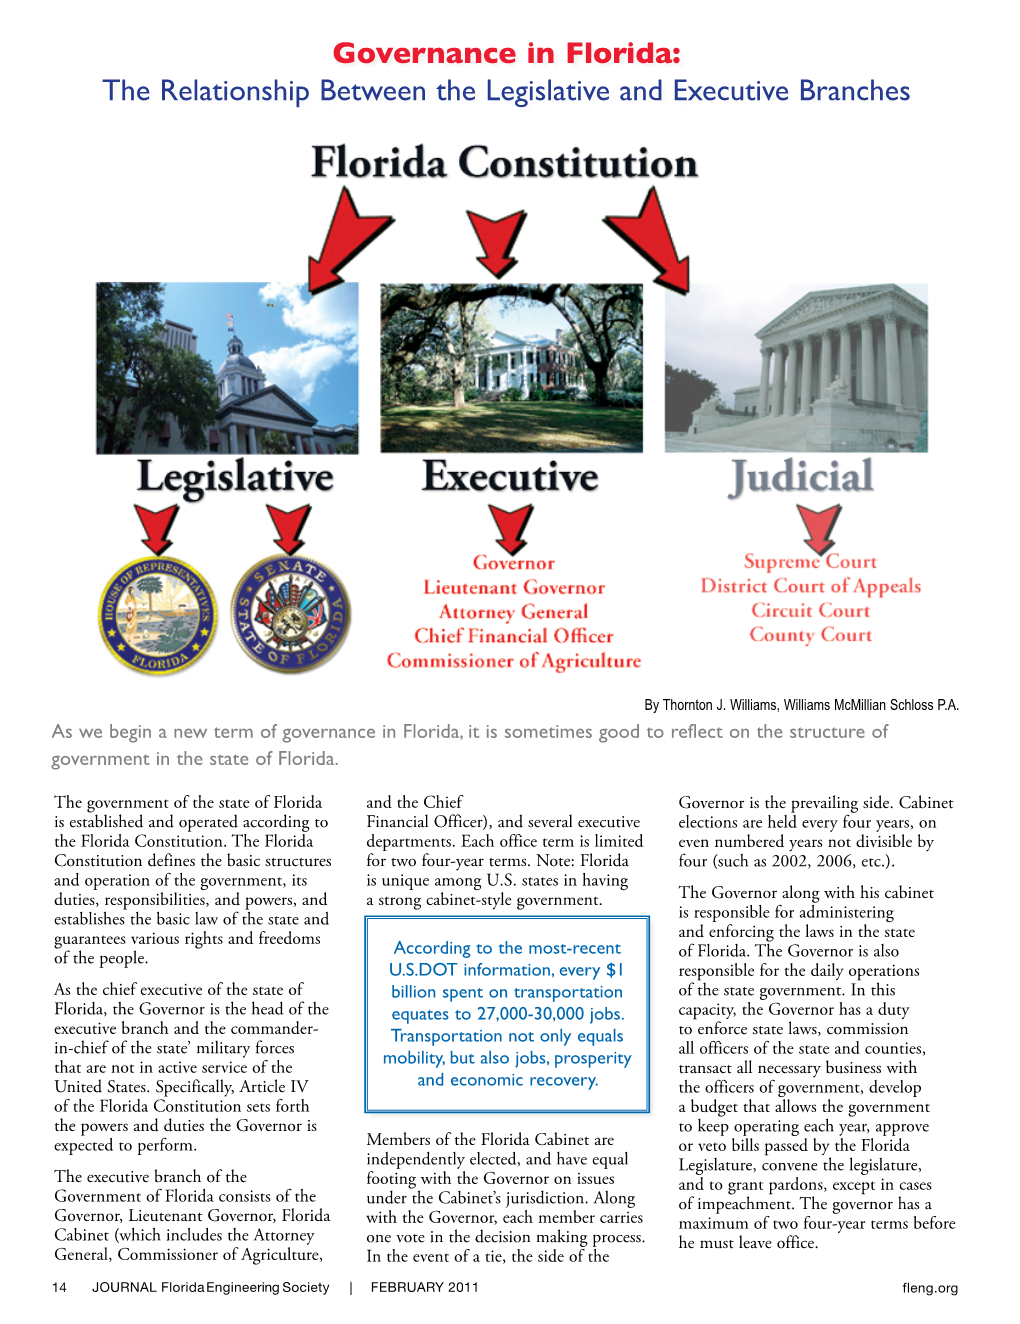 Governance in Florida: the Relationship Between the Legislative and Executive Branches